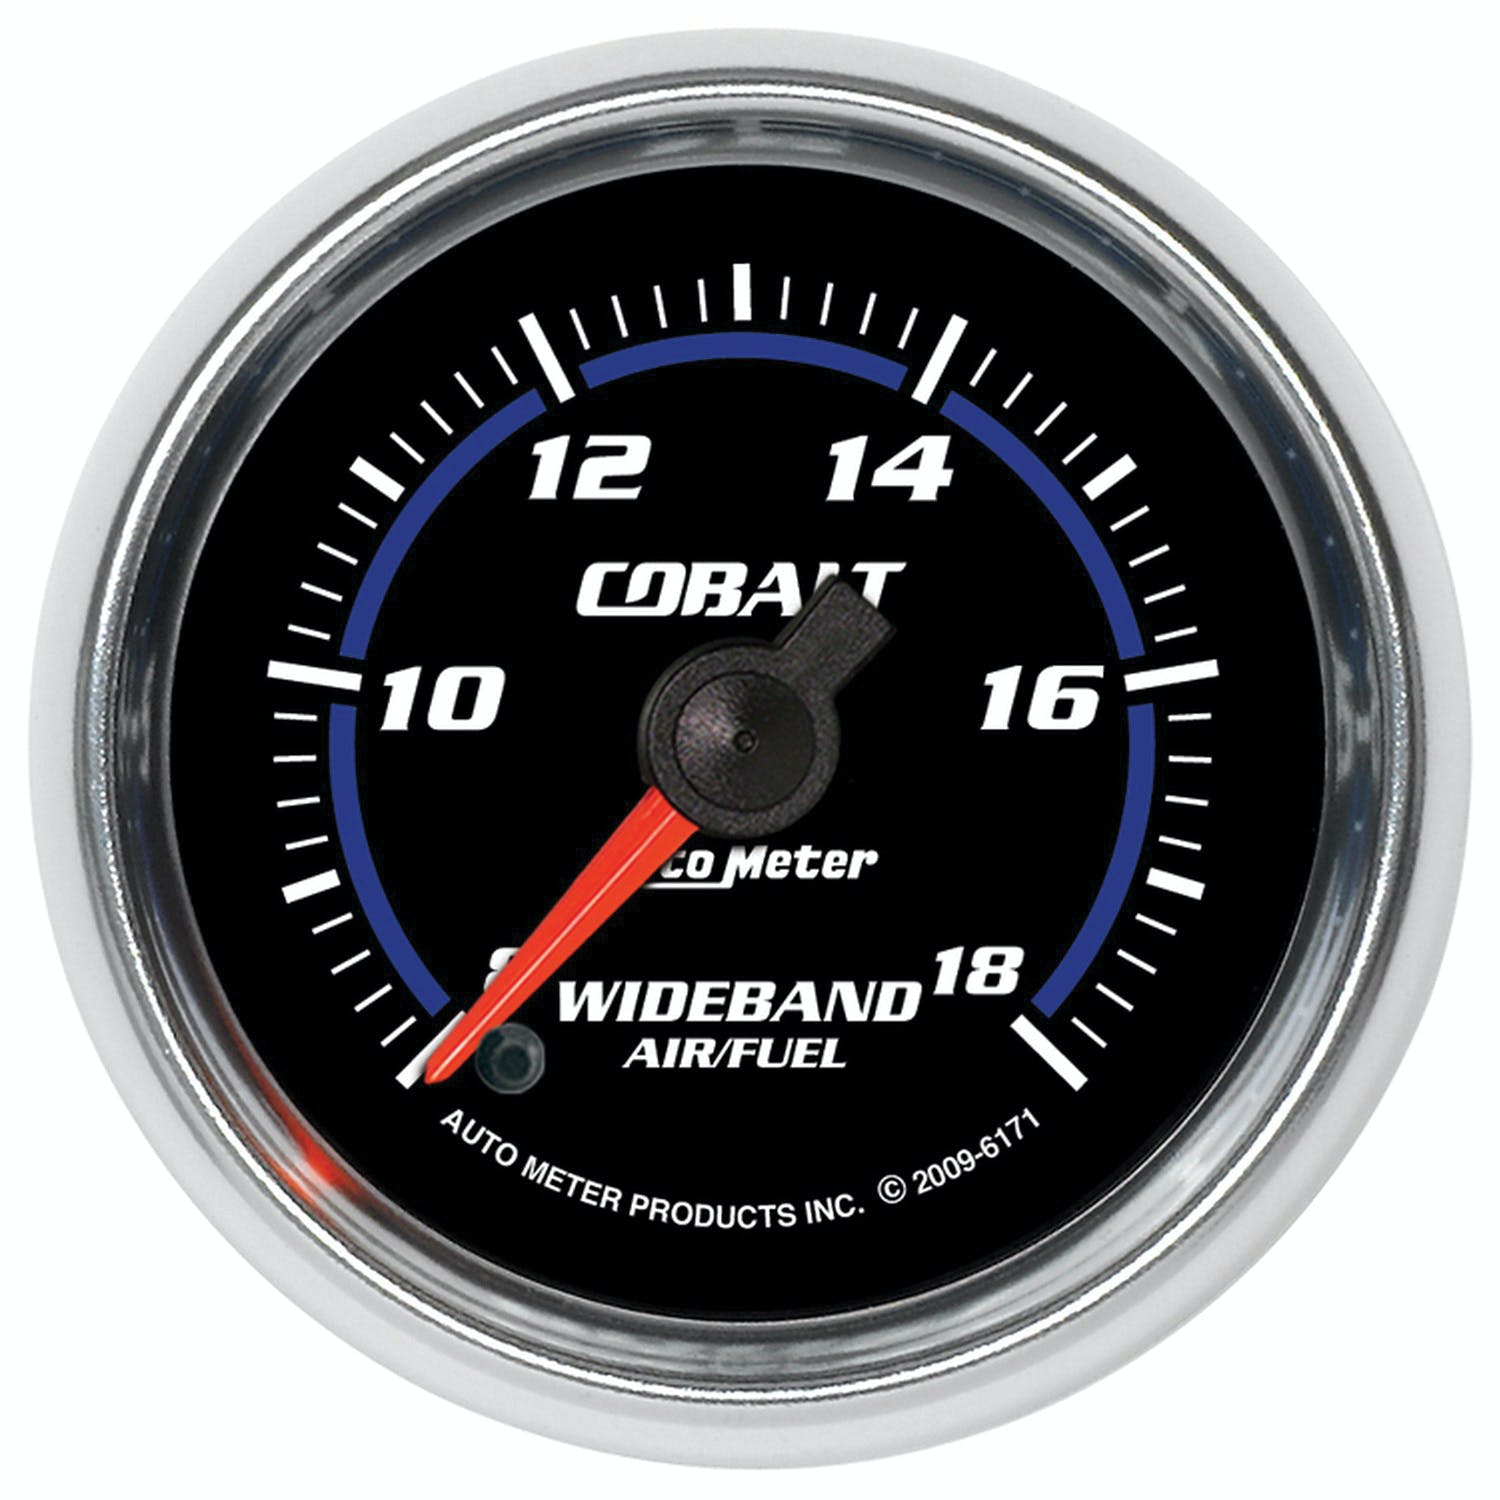 AutoMeter Products 6171 2-1/16 Analog Wideband 8-18, Cobalt